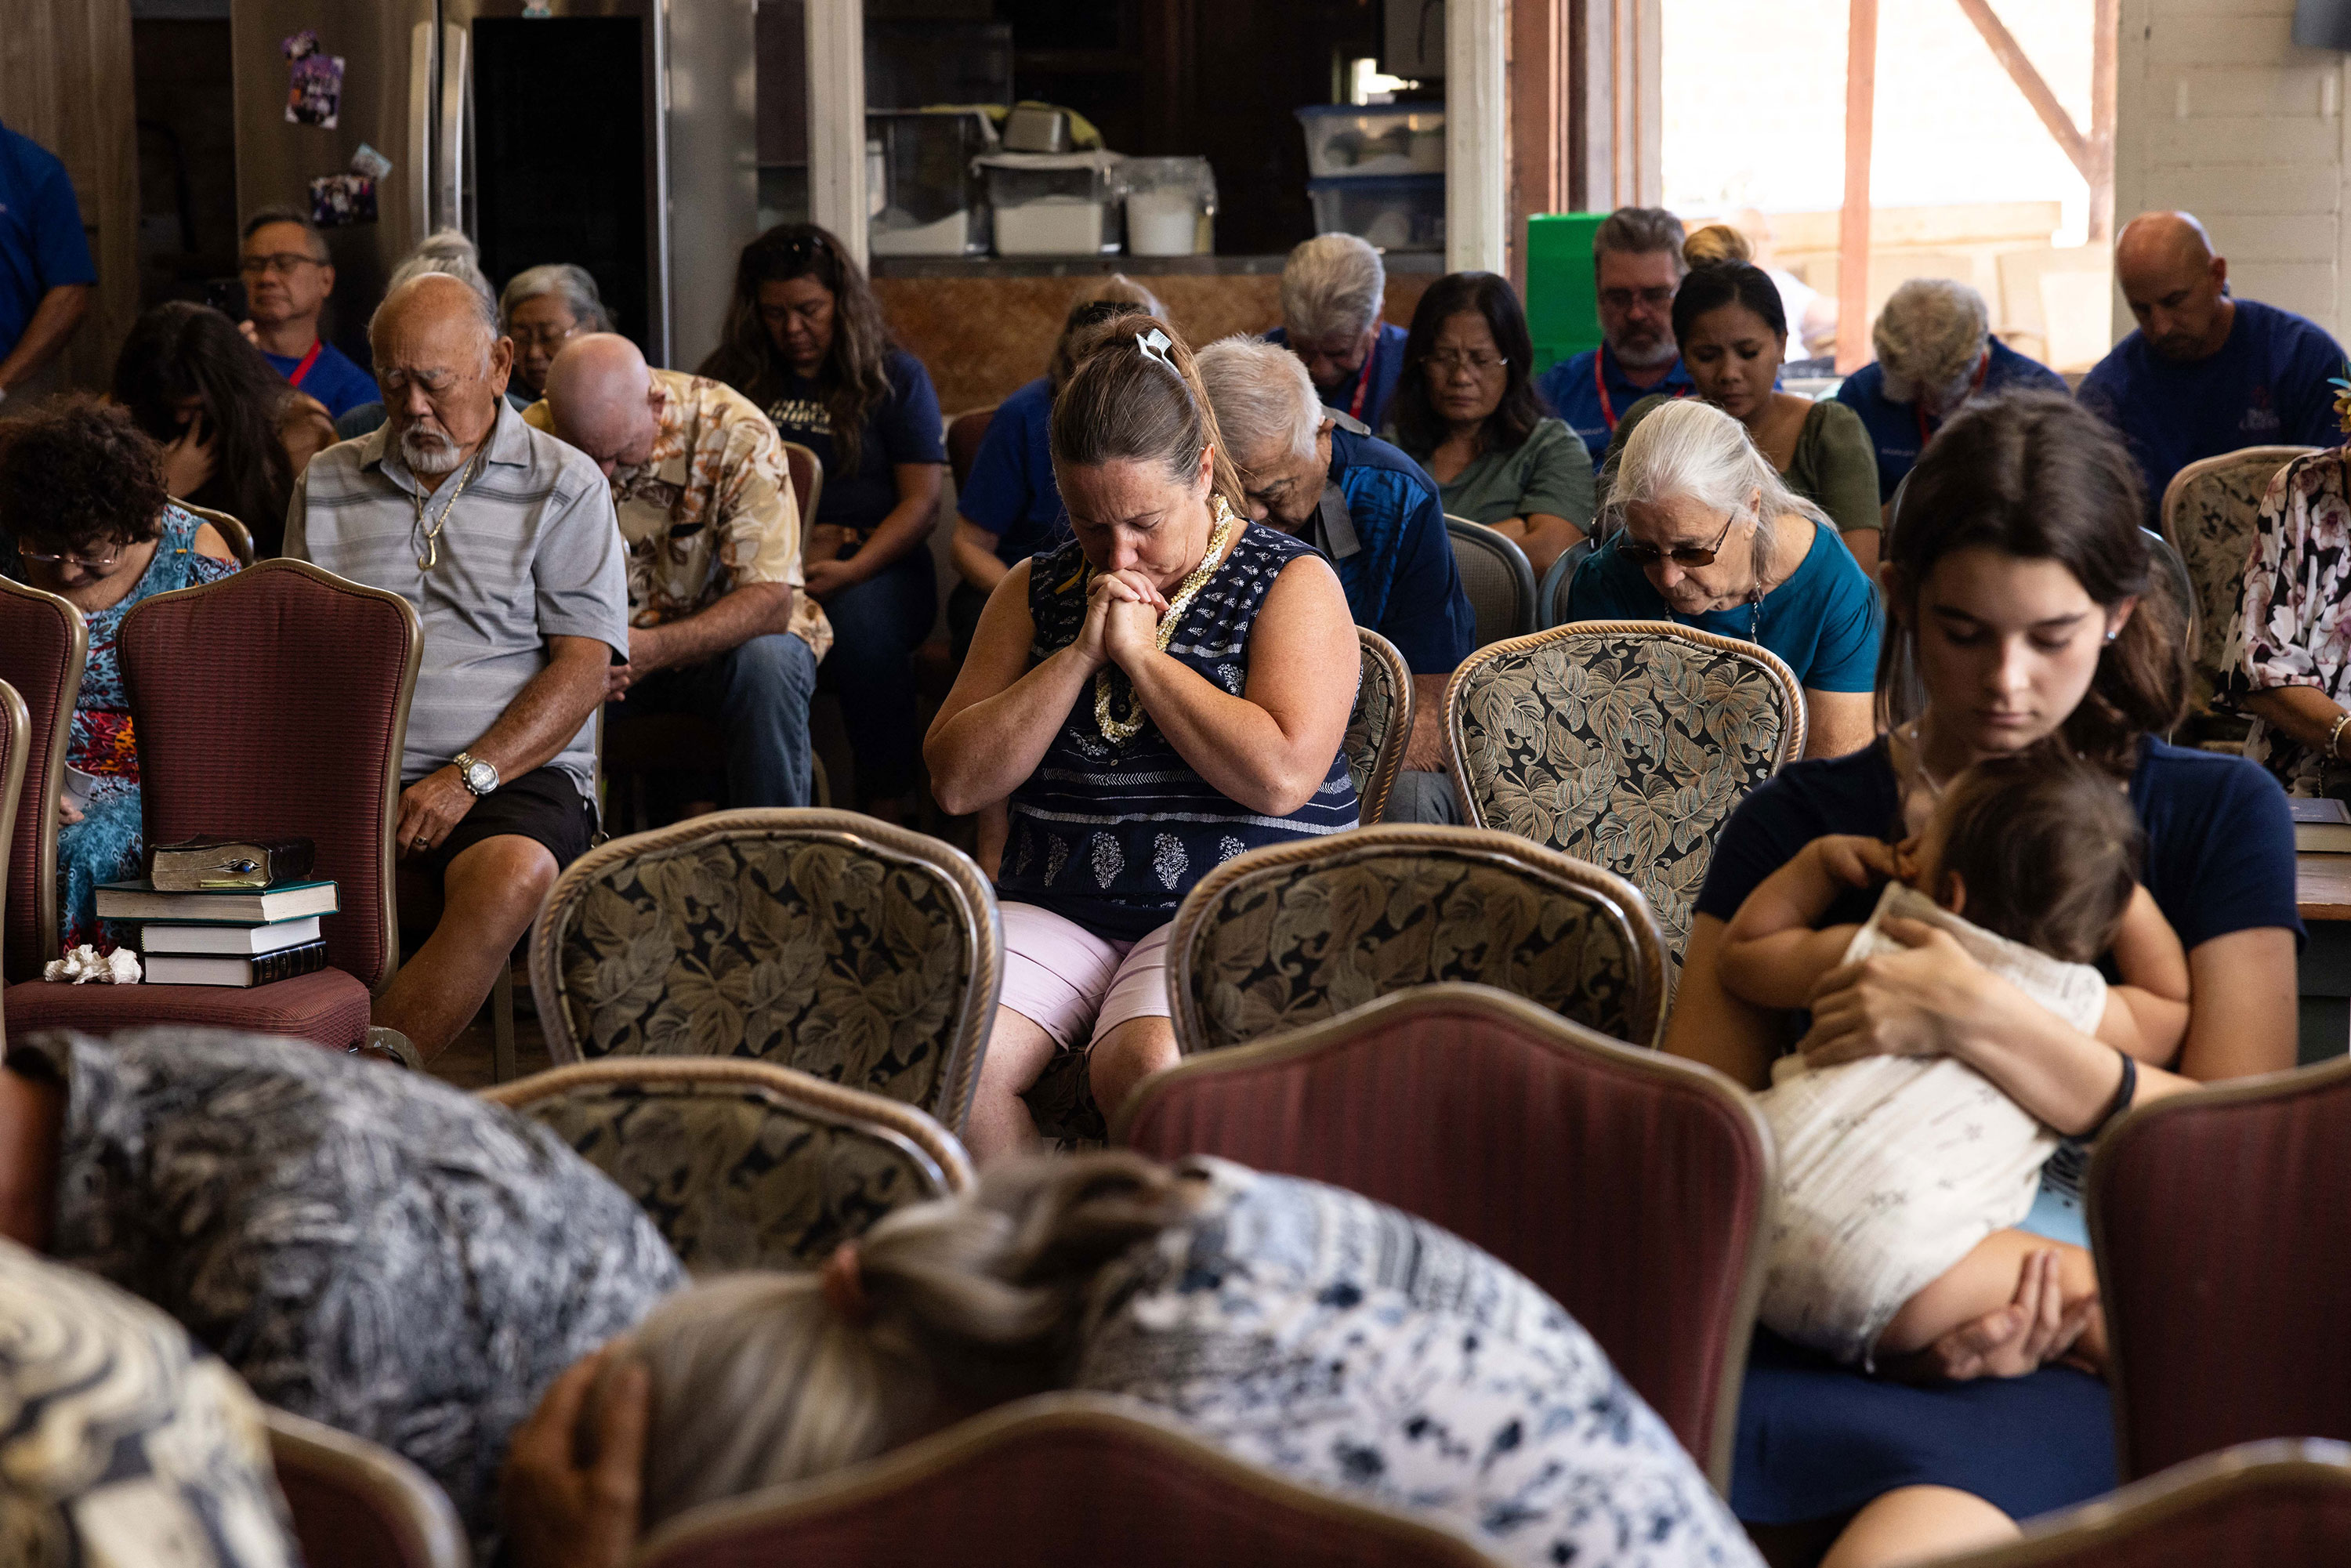 Churchgoers pray during a service held by Pastor Brown of Lahaina's Grace Baptist Church at Maui Coffee Attic in Wailuku on Sunday.